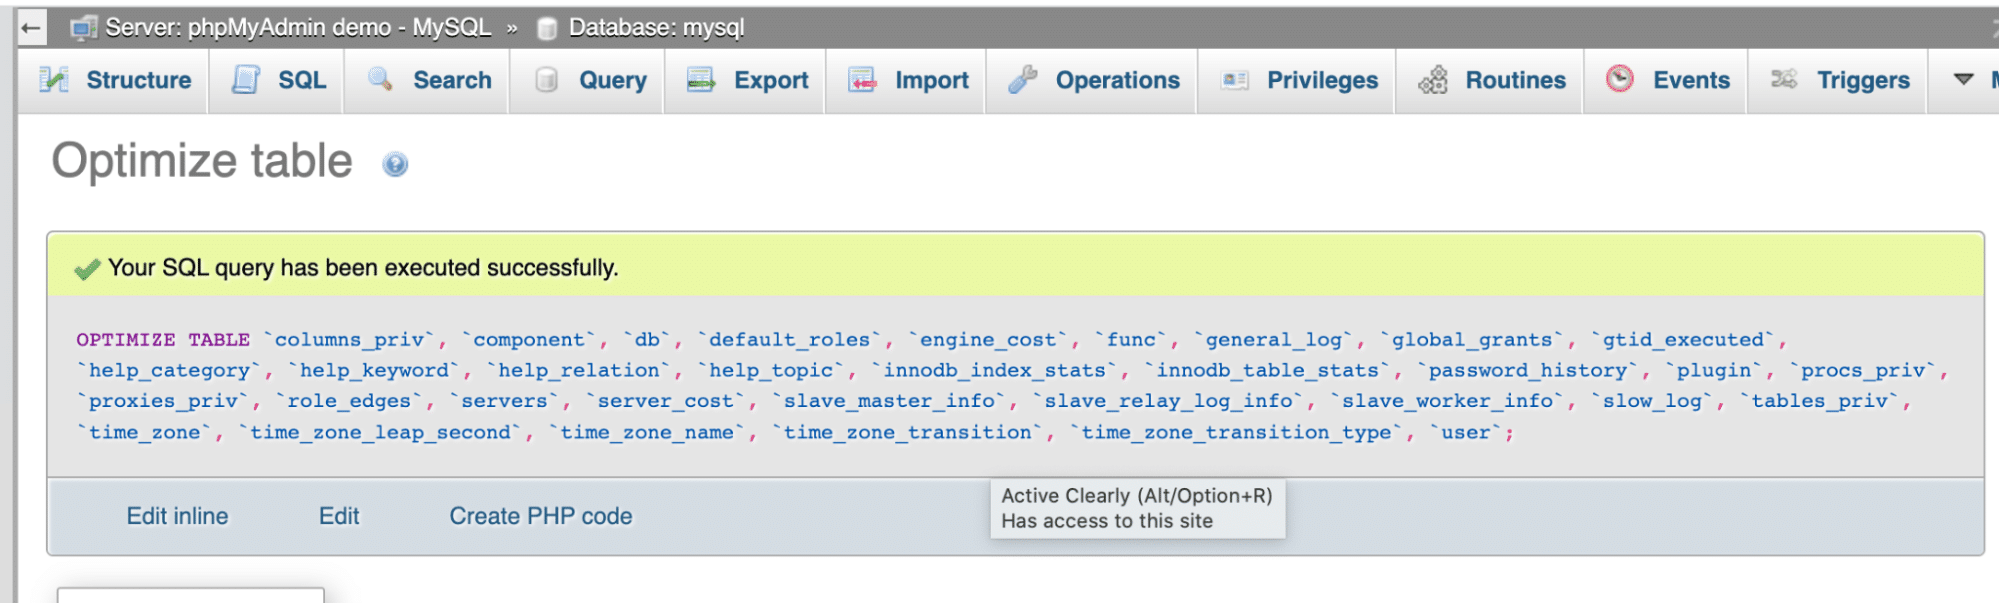 Clean up database’s confirmation message - Source: phpMyAdmin
